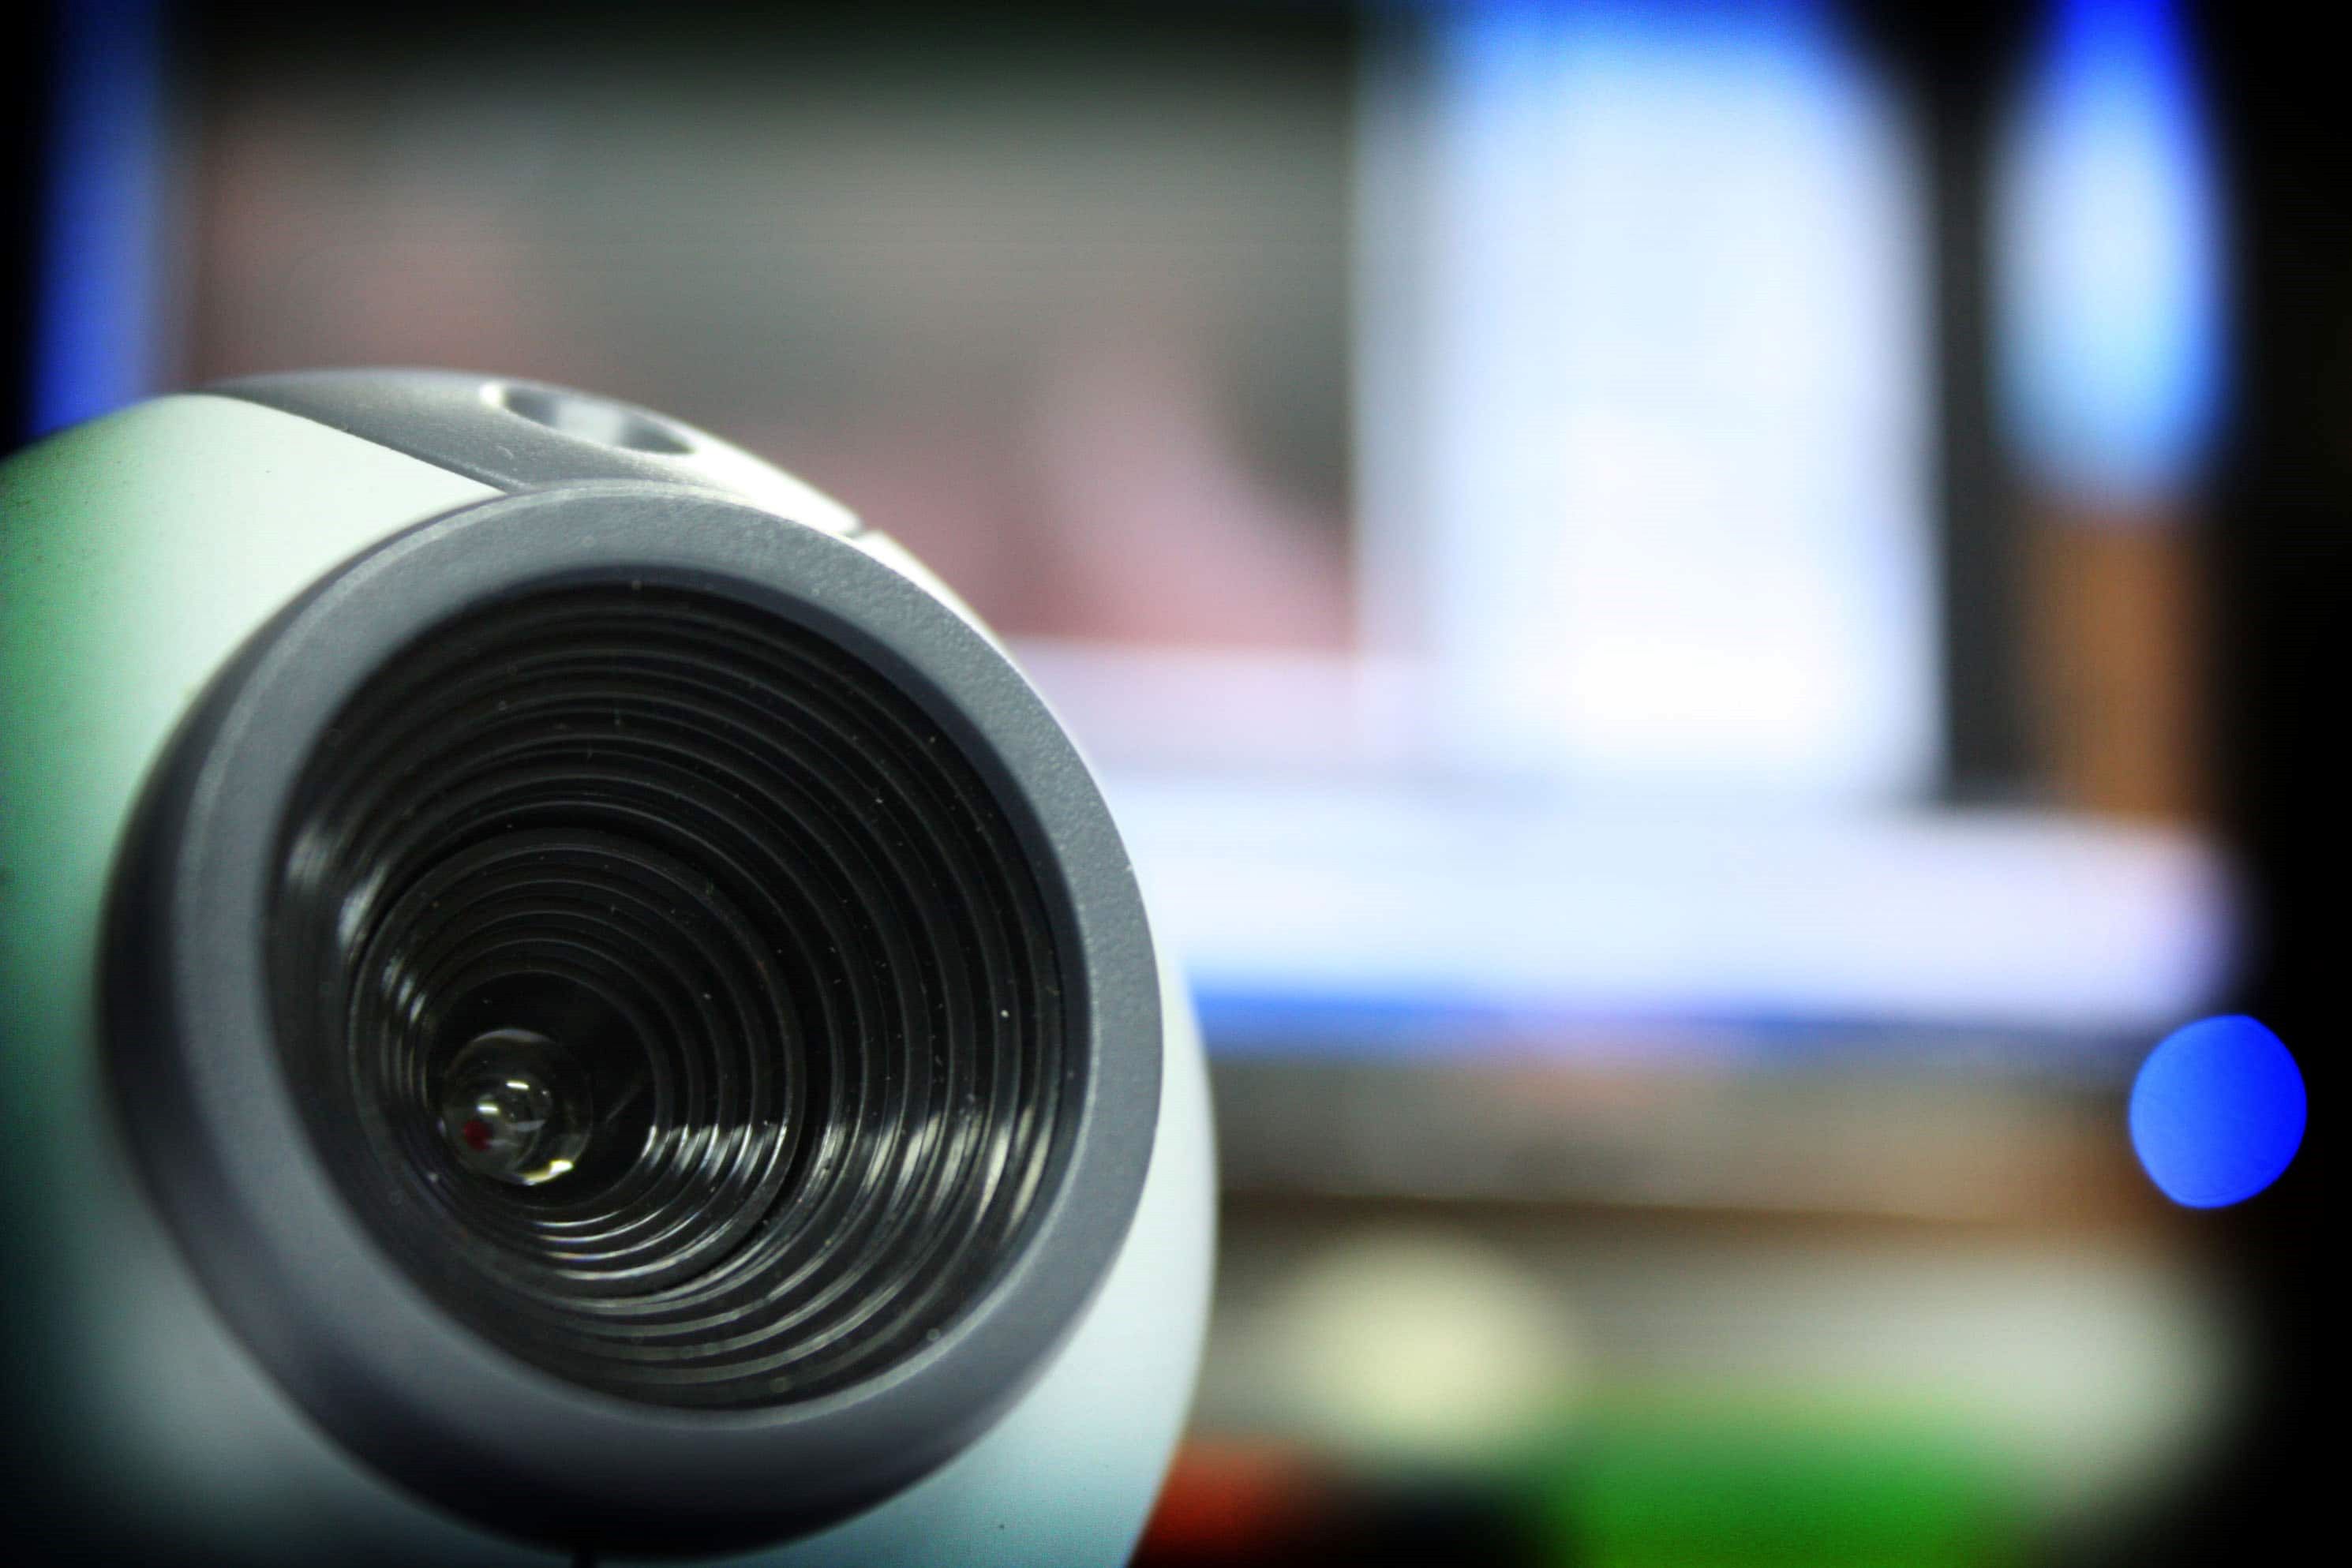 How To Use A Webcam As A Security Camera